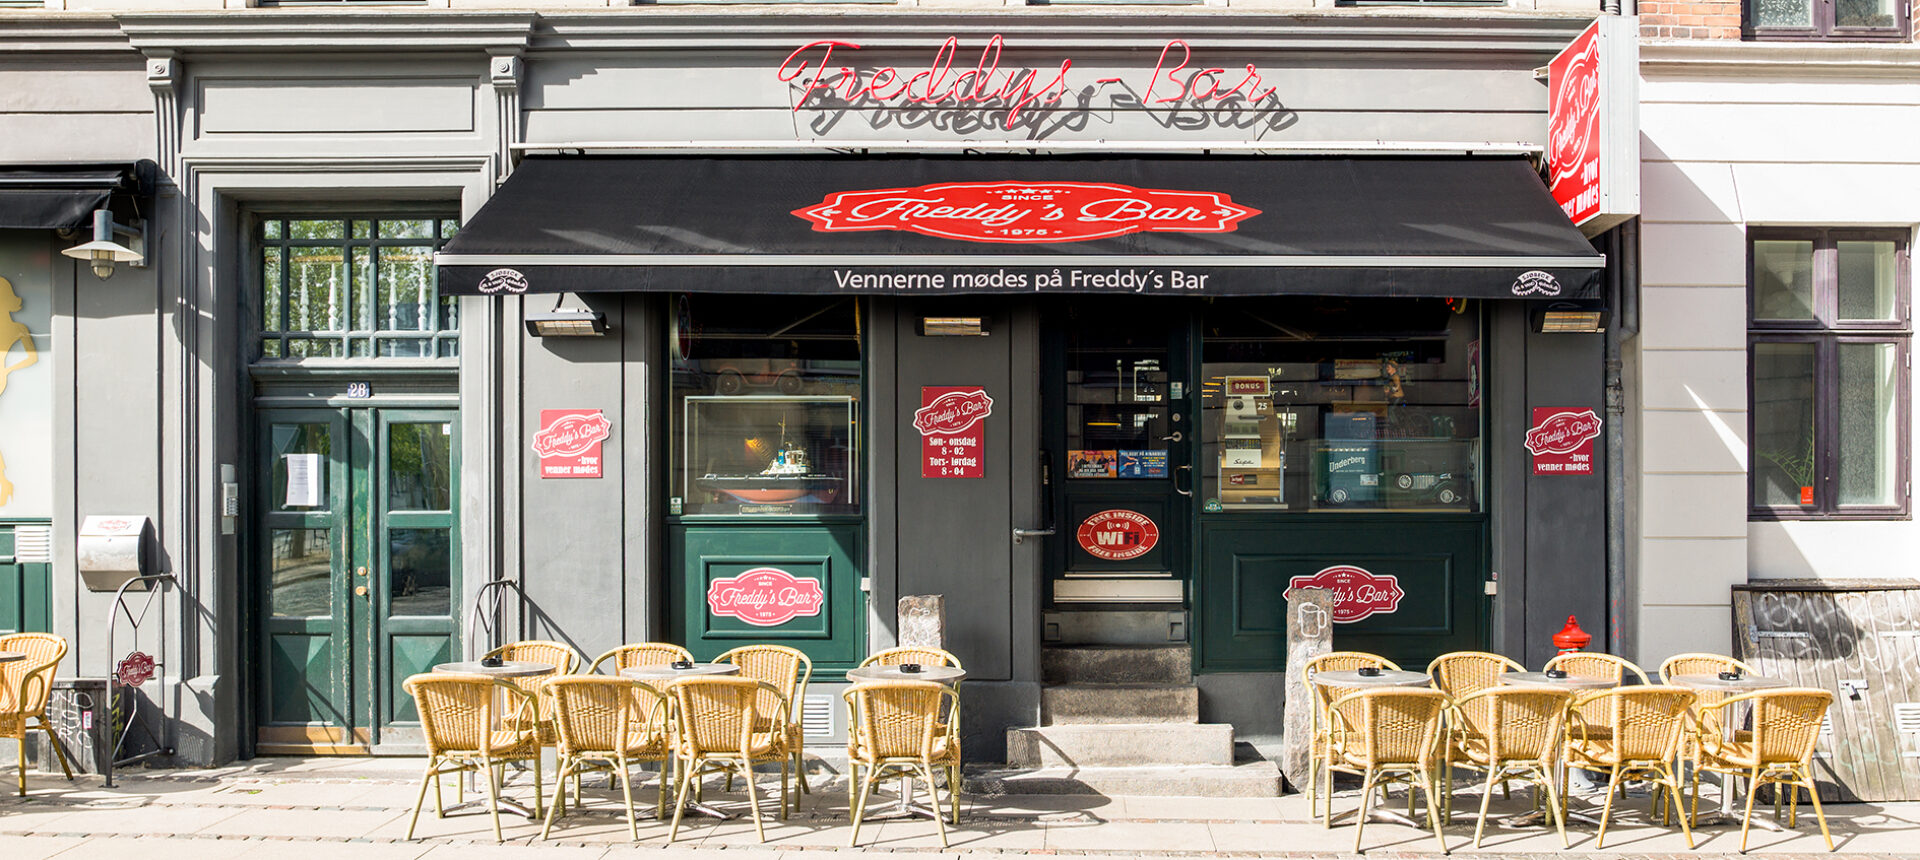 freddy's bar and kitchen